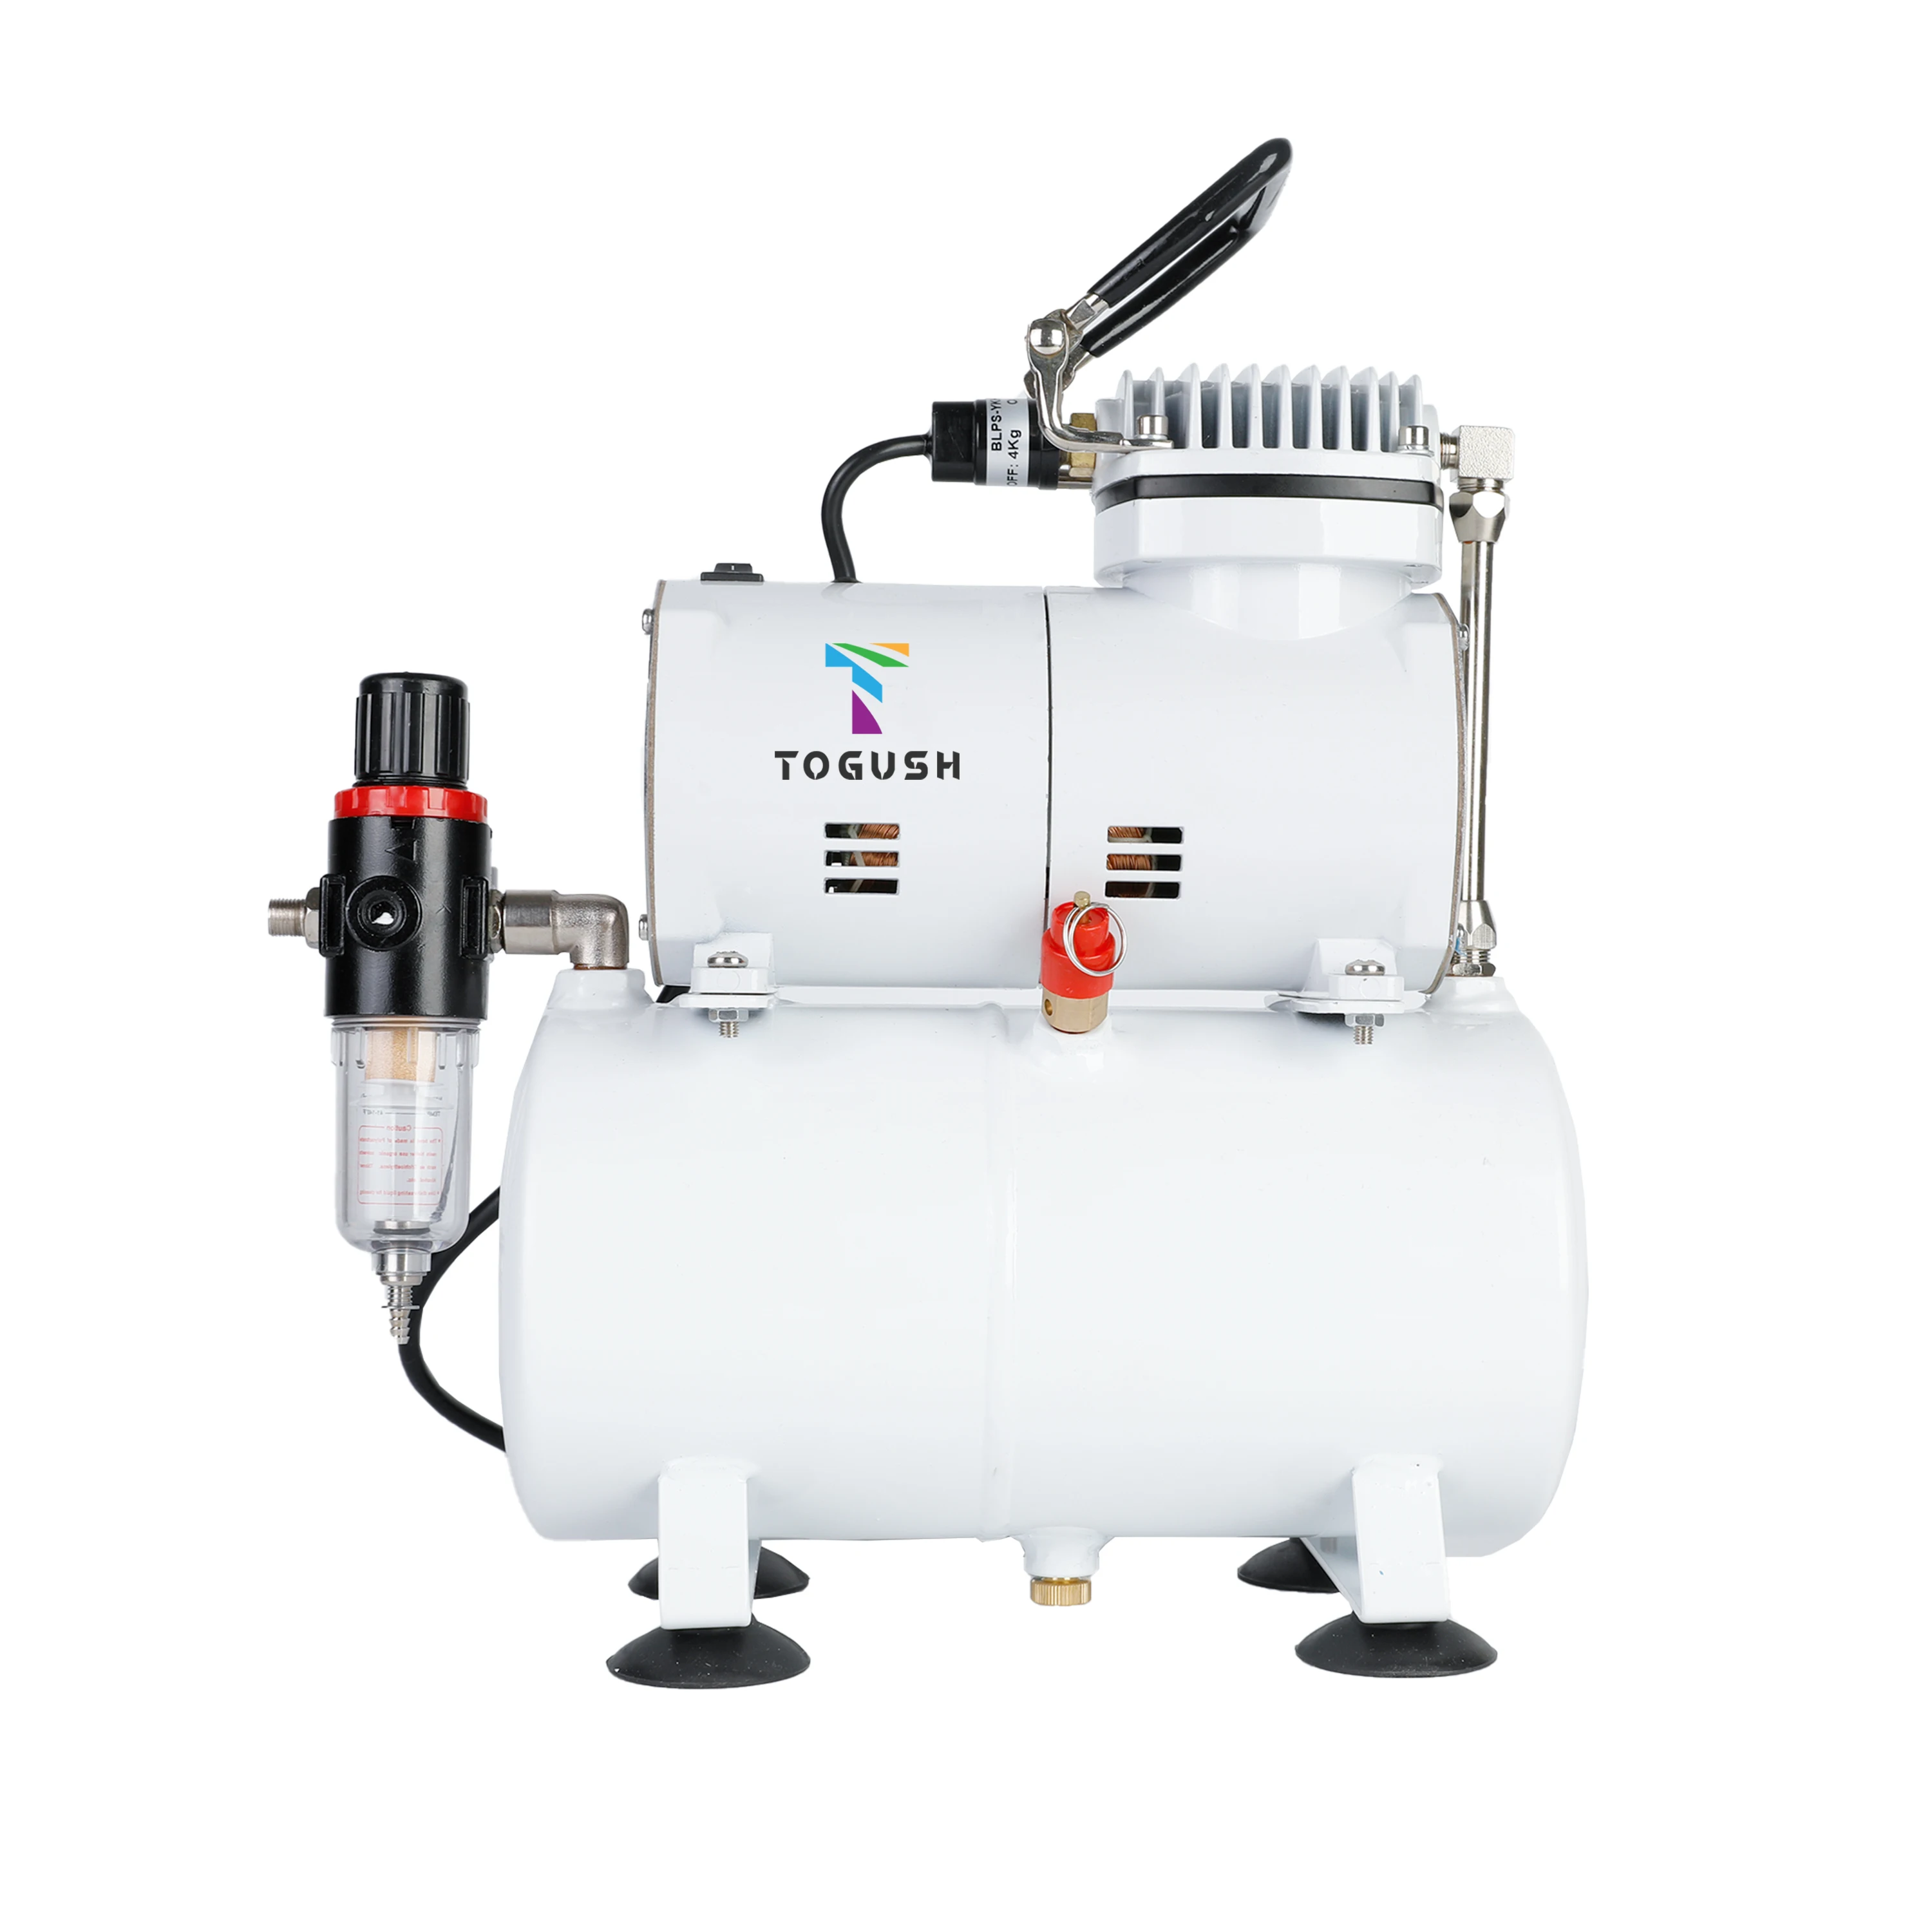 OPHIR Pro Air Tank Compressor for T-shirt Painting Tanning Hobby Model Paint 110V/220V AC134